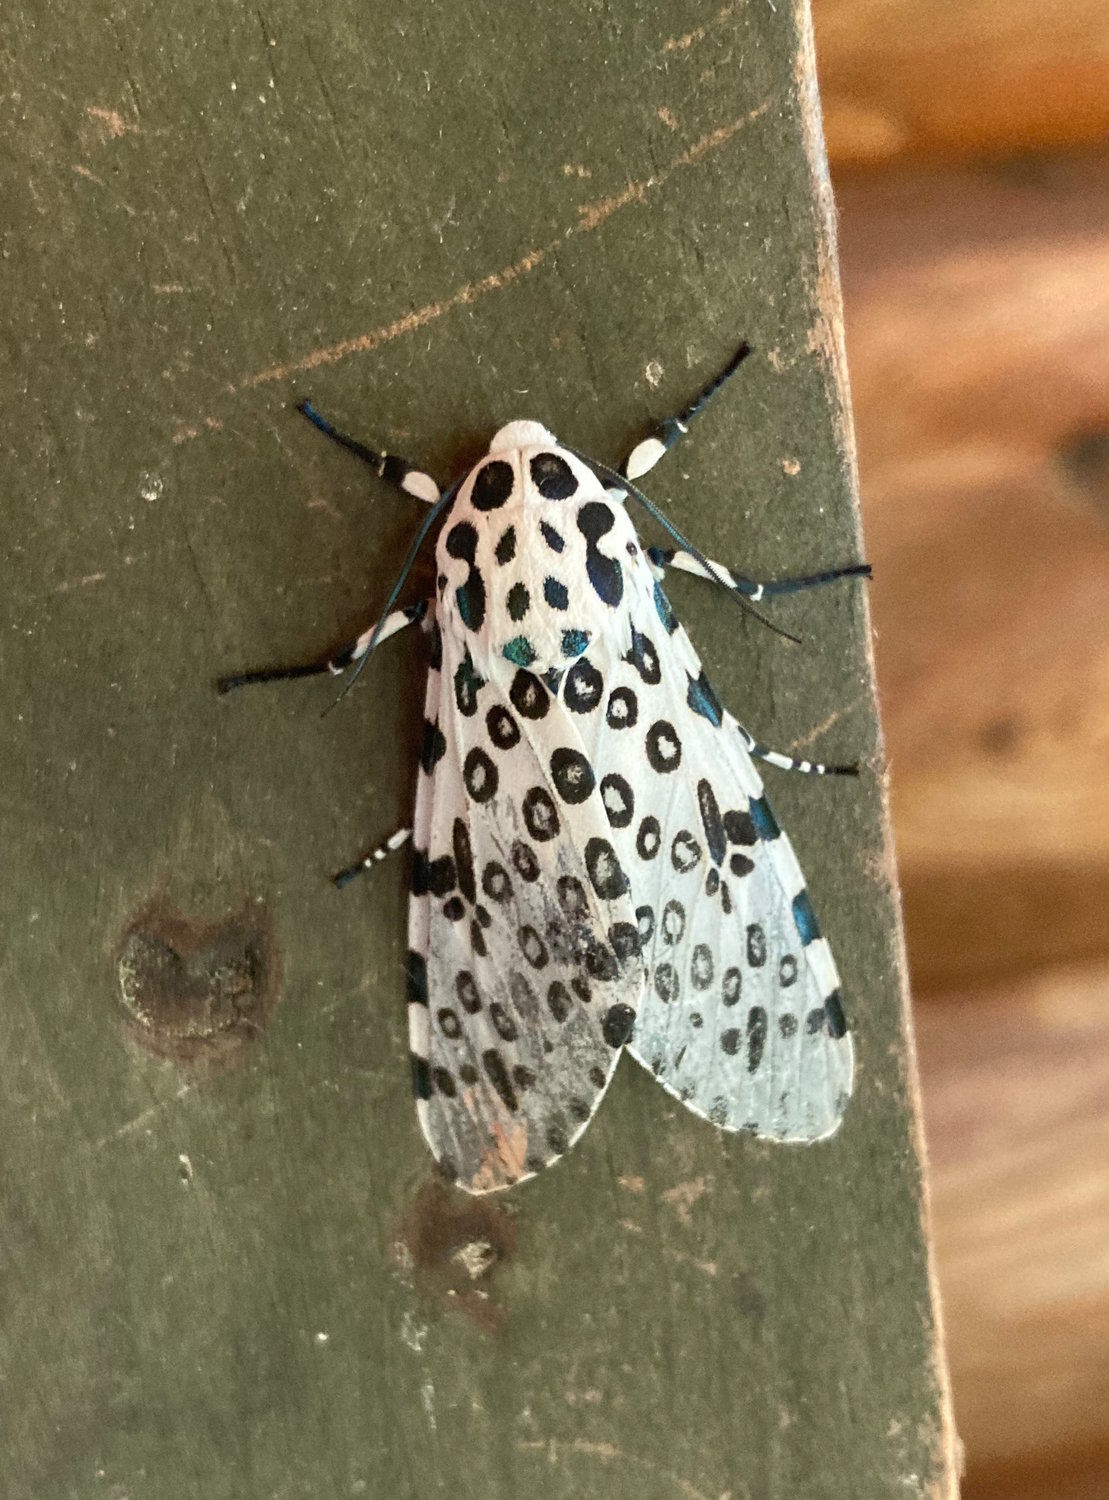 The giant leopard moth is the largest of the eastern tiger moths. Its bright white wings are spotted with patterned black and iridescent blue dots making it easy to identify.